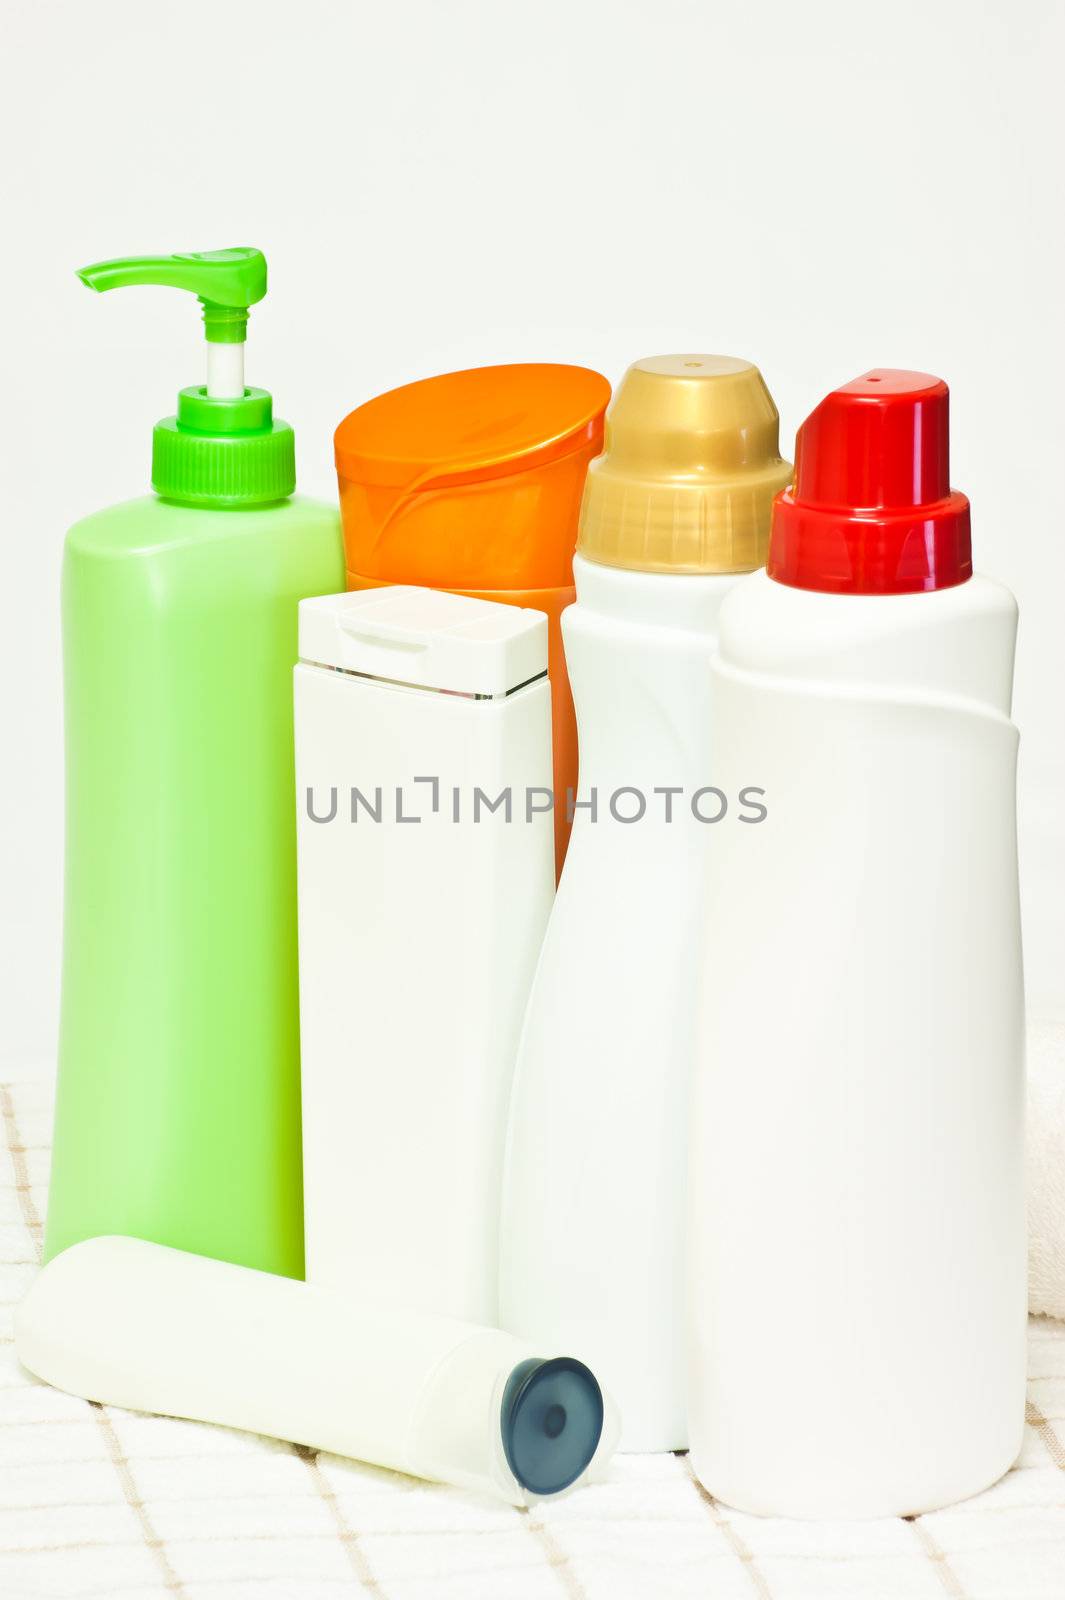 hygiene products as necessary and good for you